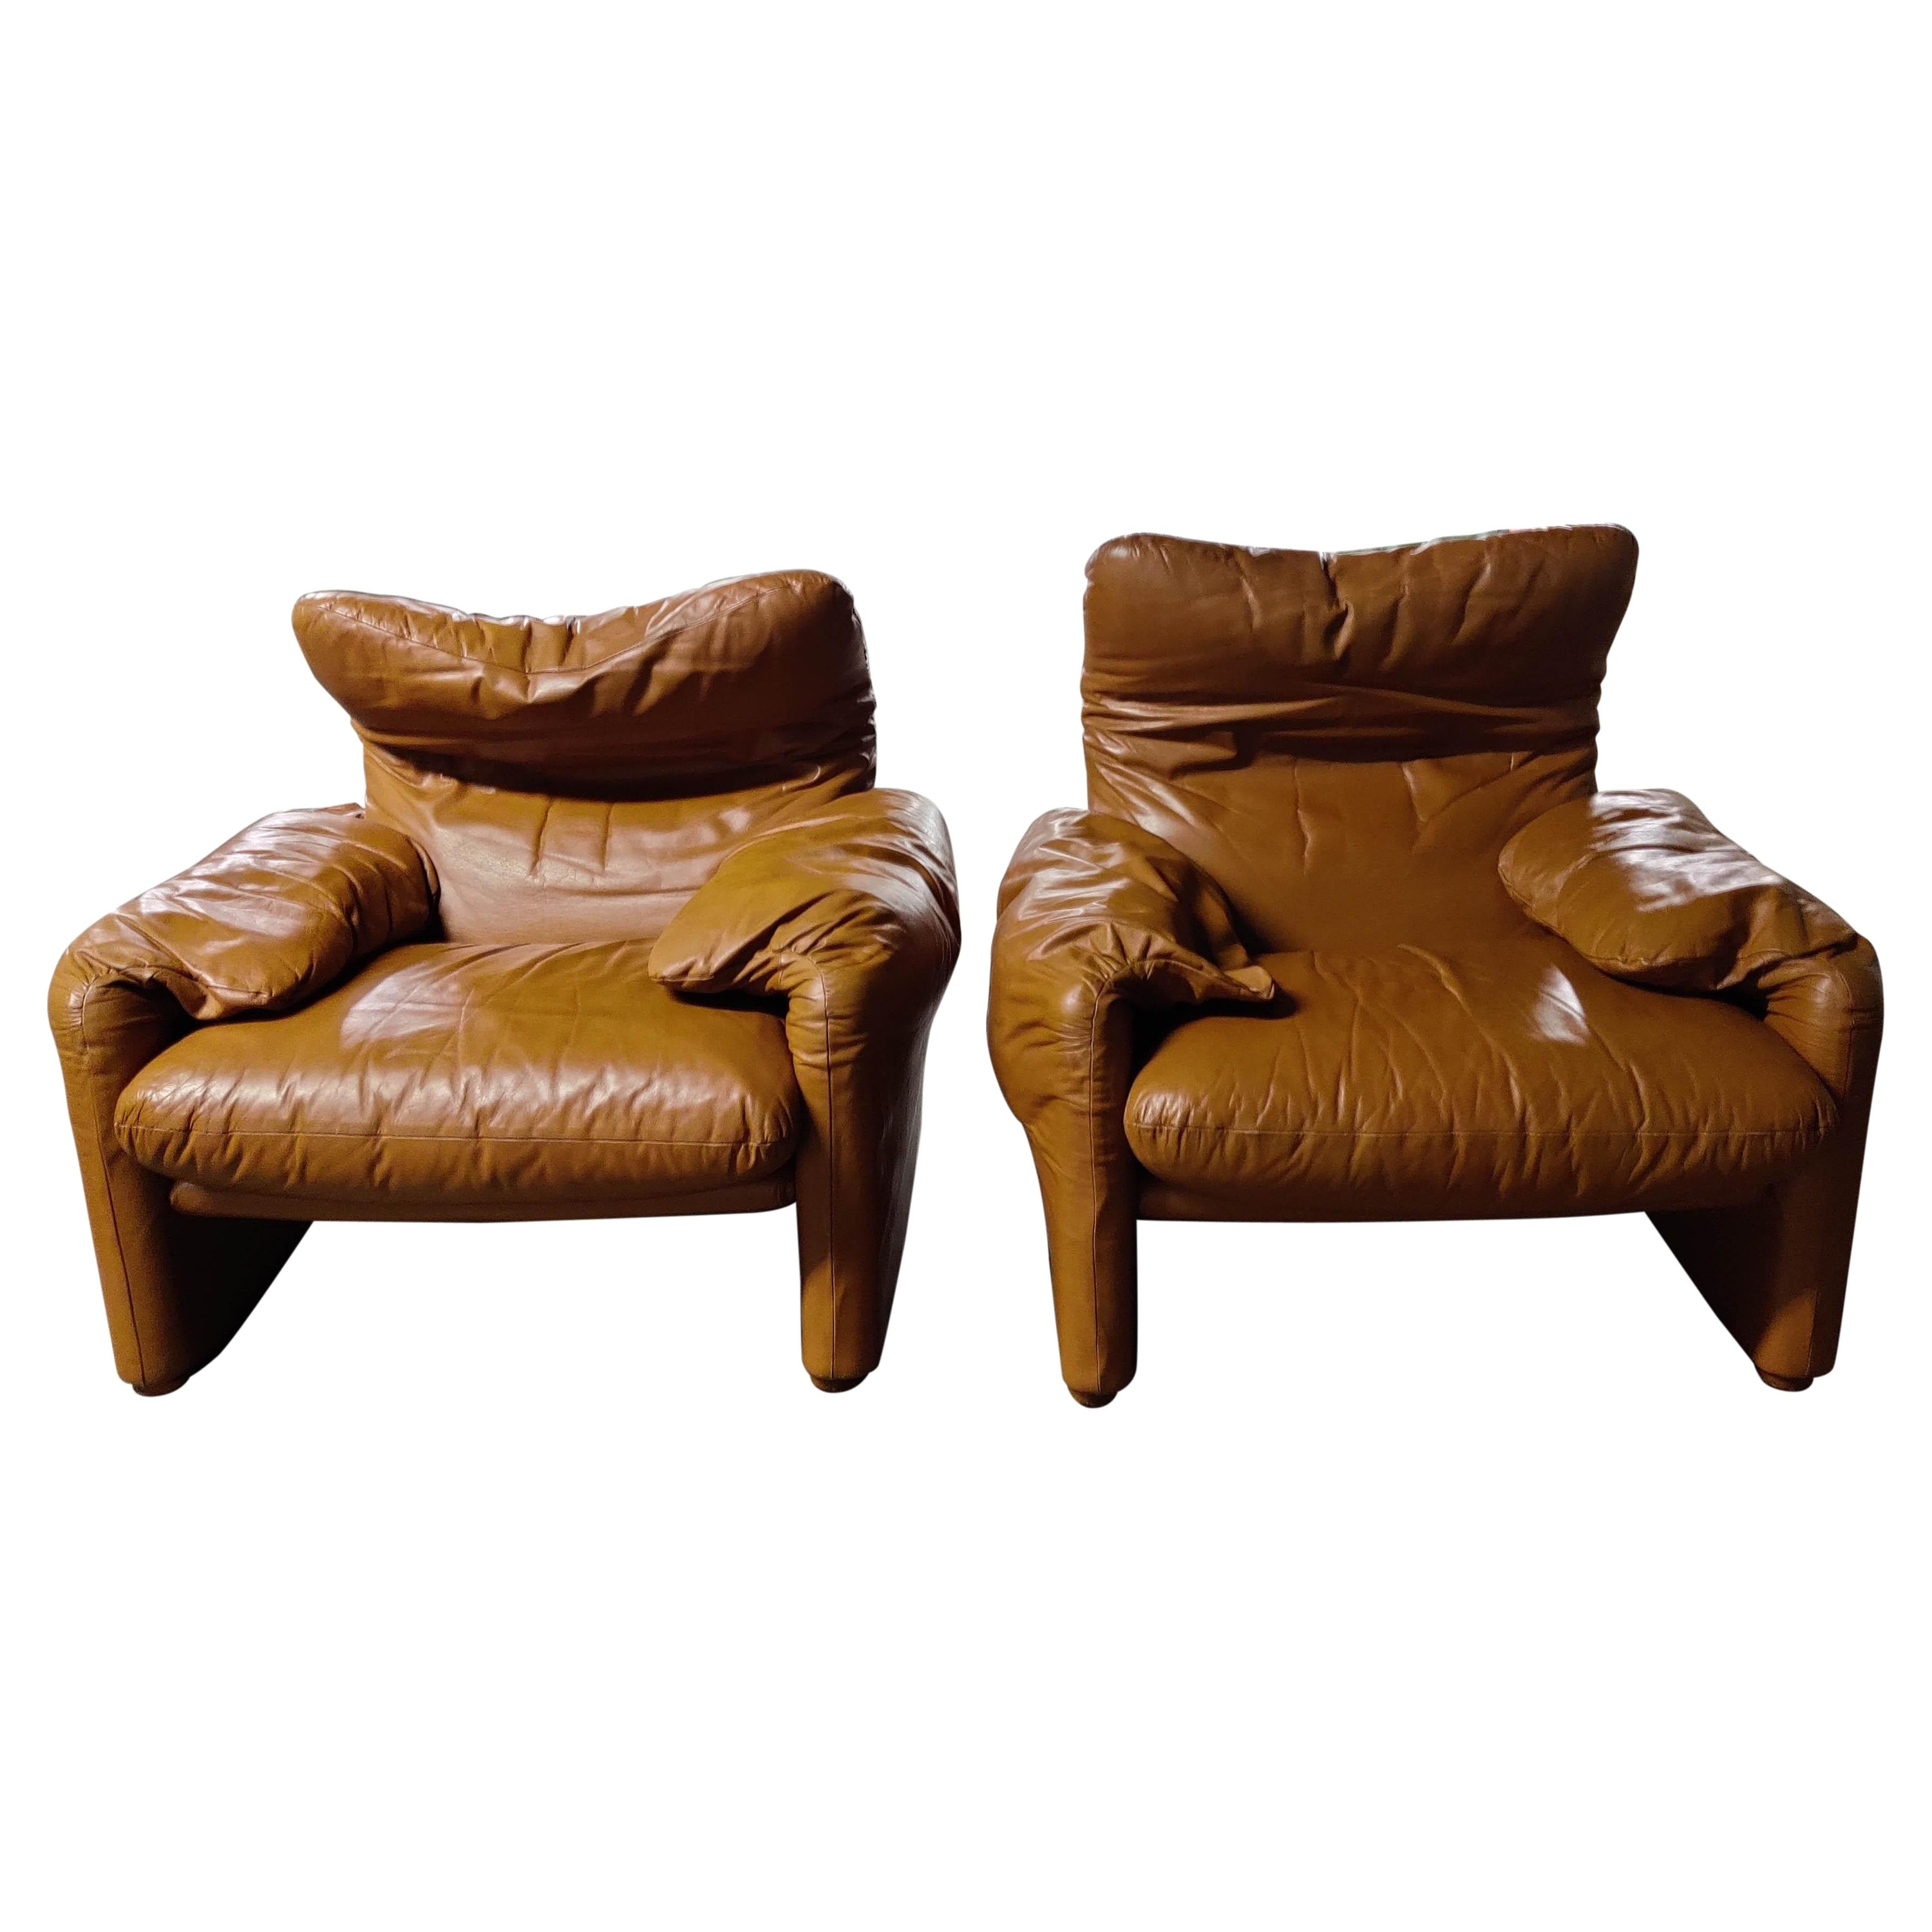 Leather Maralunga Armchairs by Vico Magistretti for Cassina, 1973, Set of 2